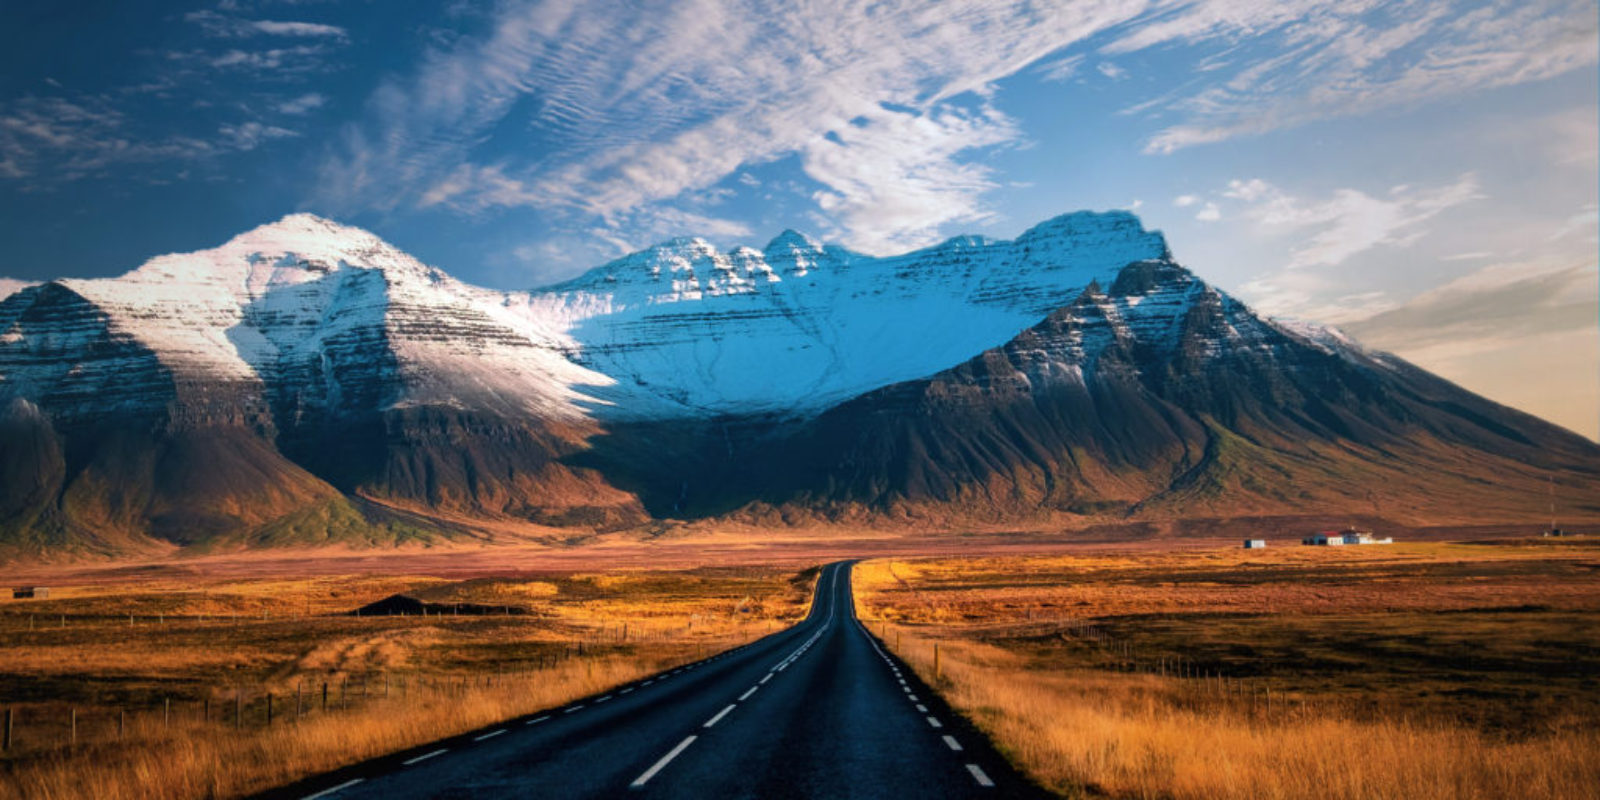 Driving Iceland's ring road is a great way to experience the entire country in a short ten day trip. This jam-packed trip highlights the stunning landscape